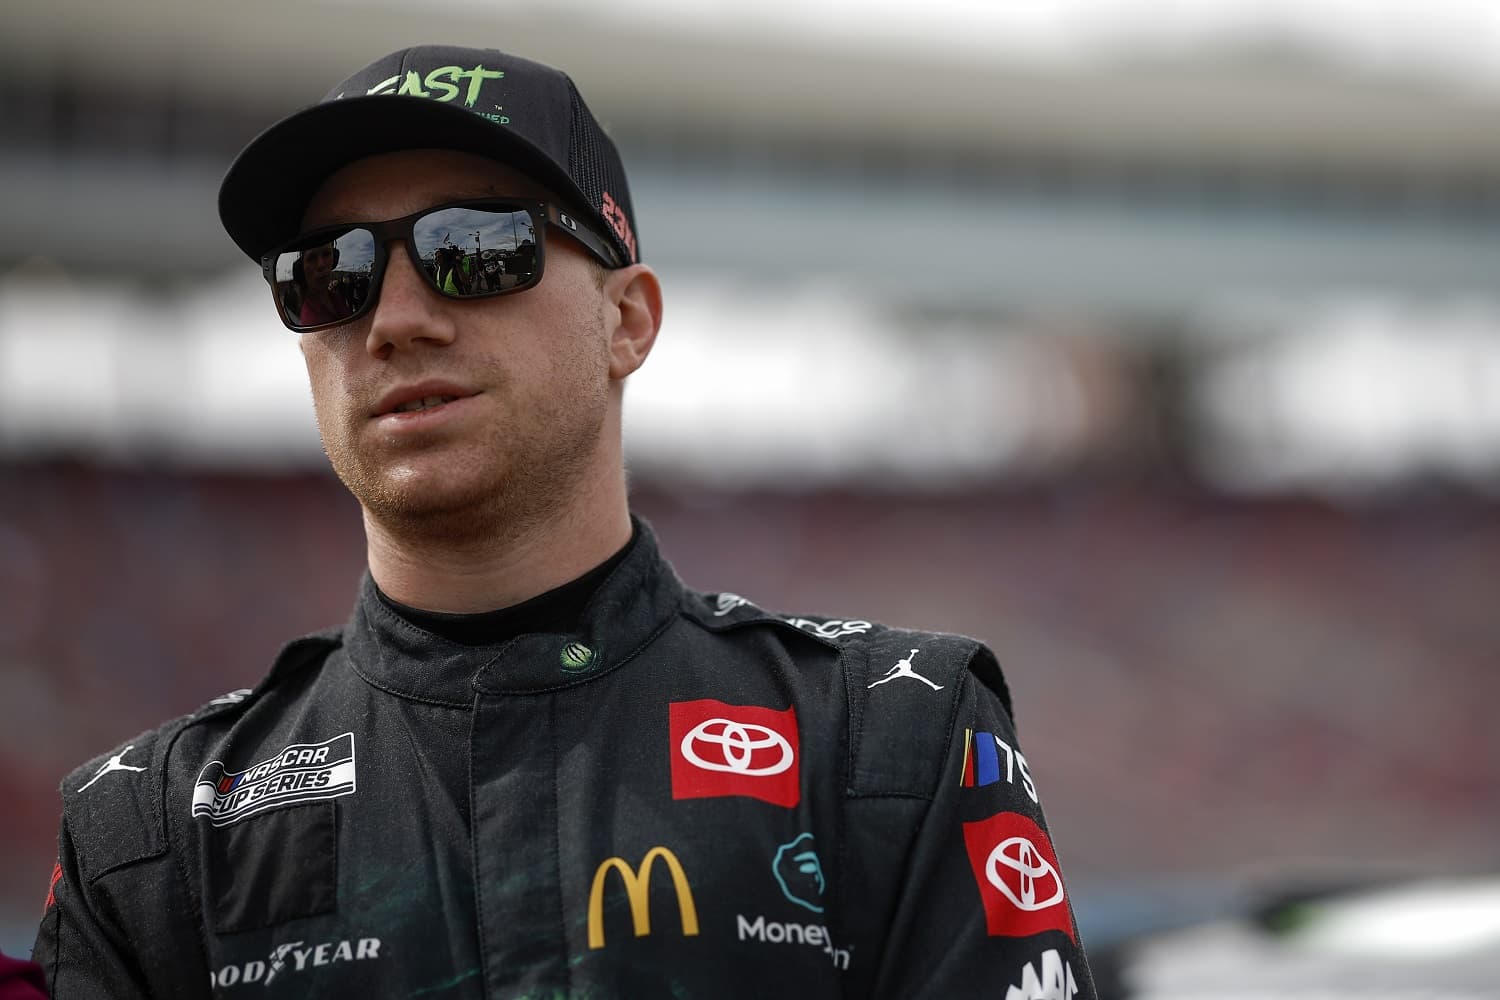 Tyler Reddick waits on the grid during qualifying for the NASCAR Cup Series United Rentals Work United 500 at Phoenix Raceway on March 11, 2023. | Chris Graythen/Getty Images